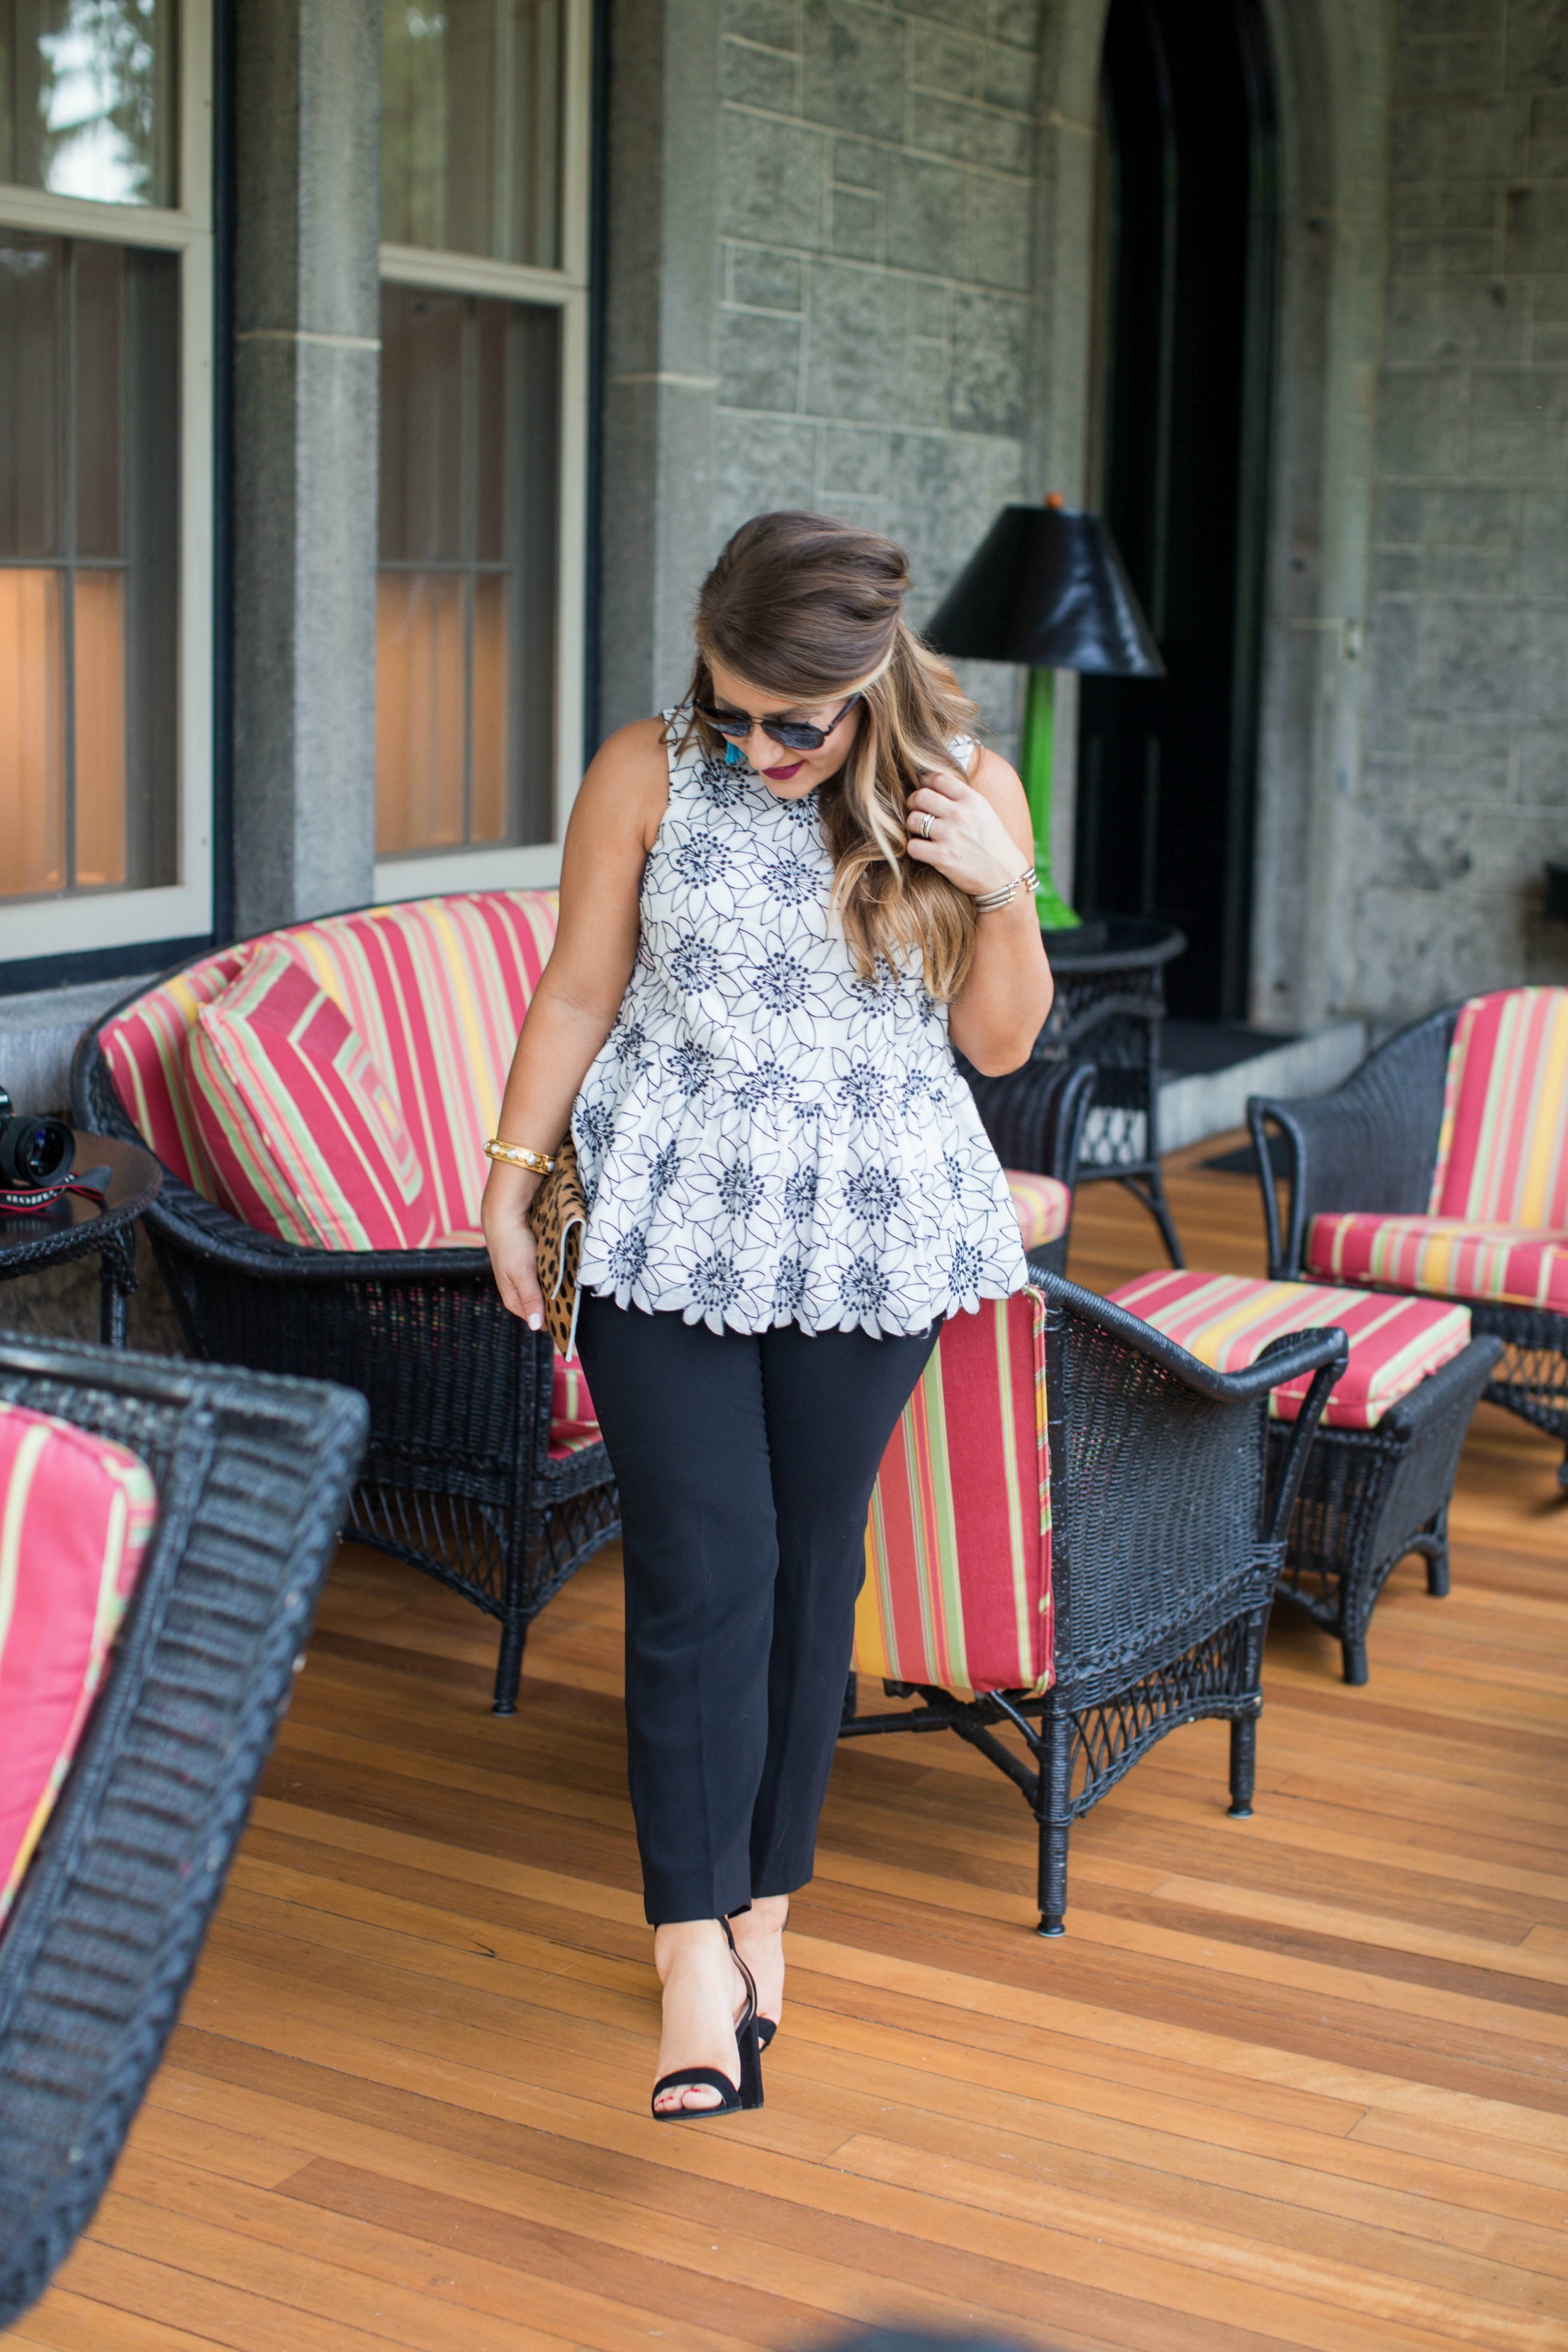 Black and White Floral Peplum Top by NC fashion blogger Coffee Beans and Bobby Pins